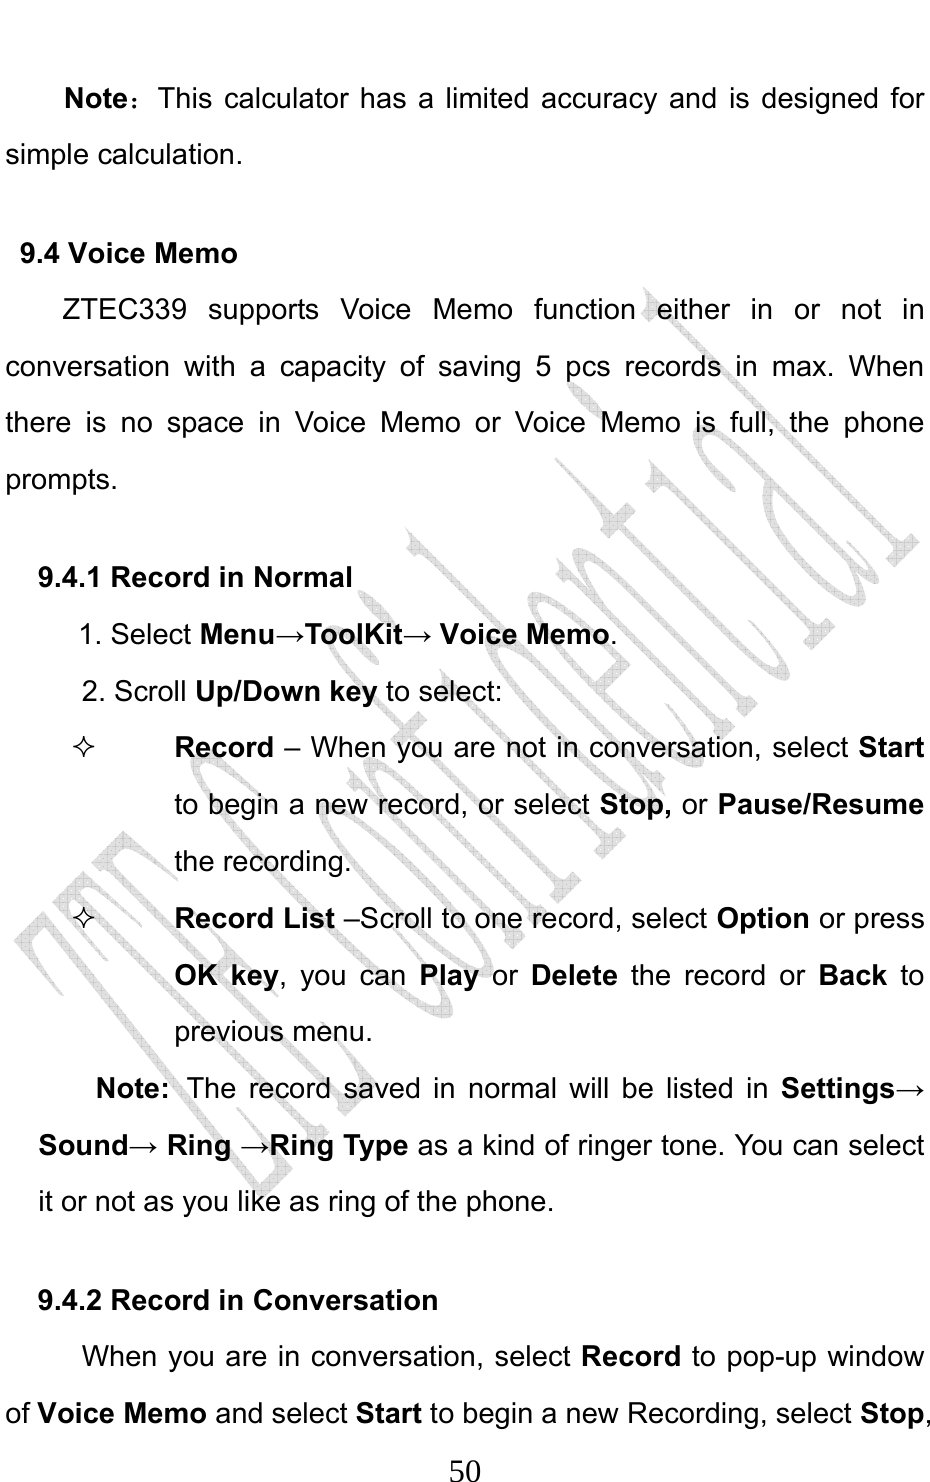                              50Note：This calculator has a limited accuracy and is designed for simple calculation.   9.4 Voice Memo ZTEC339 supports Voice Memo function either in or not in conversation with a capacity of saving 5 pcs records in max. When there is no space in Voice Memo or Voice Memo is full, the phone prompts.  9.4.1 Record in Normal   1. Select Menu→ToolKit→ Voice Memo. 2. Scroll Up/Down key to select:  Record – When you are not in conversation, select Start to begin a new record, or select Stop, or Pause/Resume the recording.  Record List –Scroll to one record, select Option or press OK key, you can Play or Delete the record or Back to previous menu. Note: The record saved in normal will be listed in Settings→ Sound→ Ring →Ring Type as a kind of ringer tone. You can select it or not as you like as ring of the phone.   9.4.2 Record in Conversation When you are in conversation, select Record to pop-up window of Voice Memo and select Start to begin a new Recording, select Stop, 